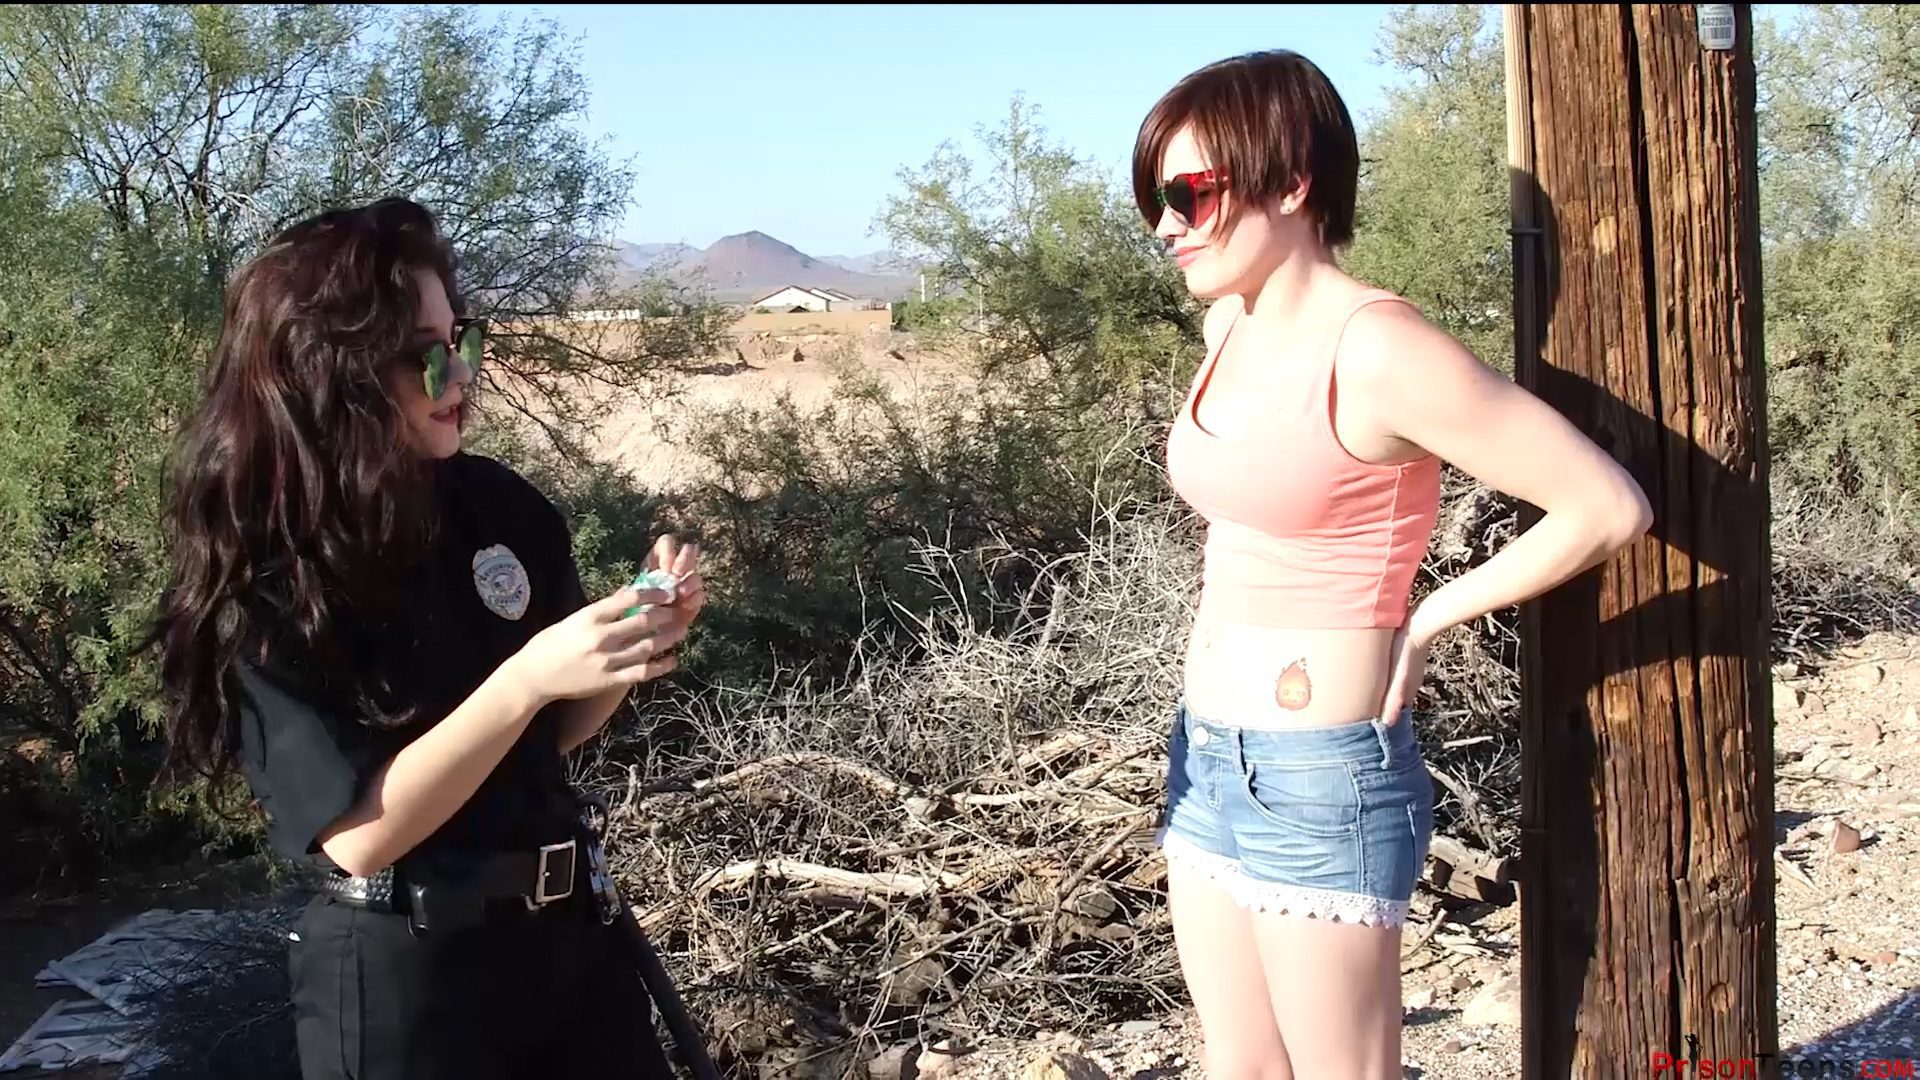 Violet Pixie is found trespassing She is searched and arrested by Officer Persephone